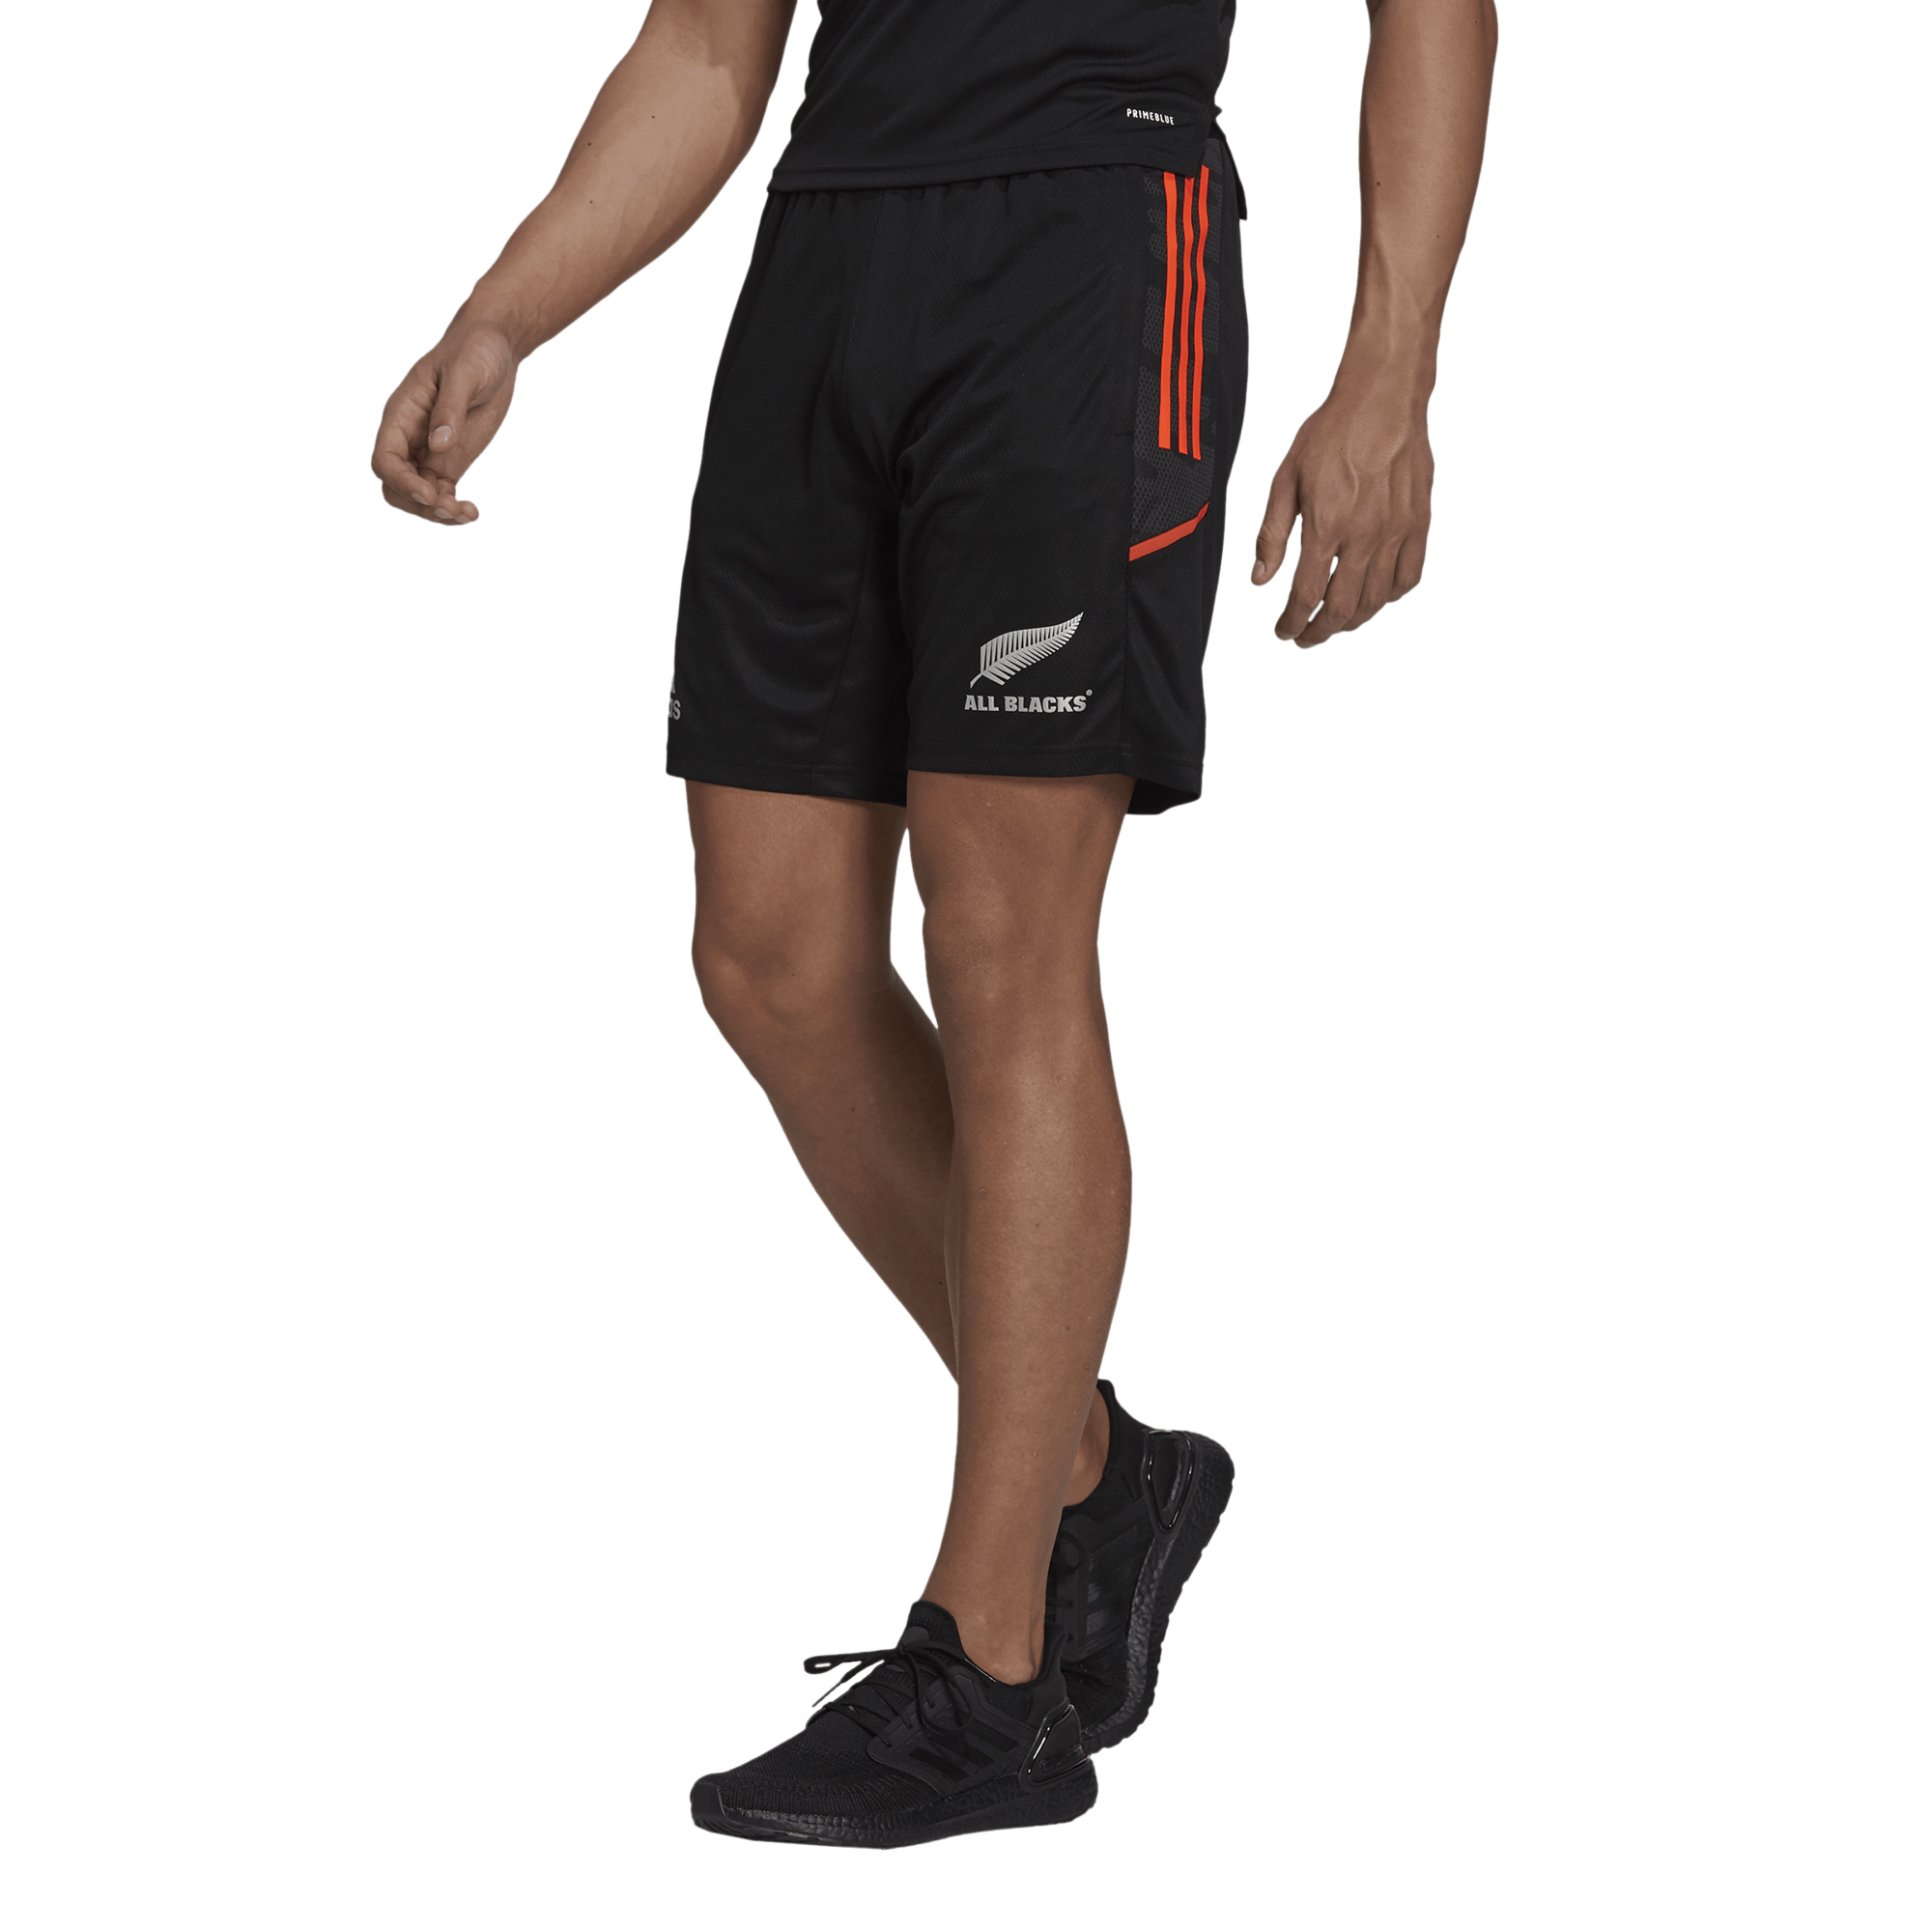 Afgrond textuur enkel en alleen All Blacks Gym Shorts by adidas | New Zealand Rugby Training Shorts - Black  - World Rugby Shop